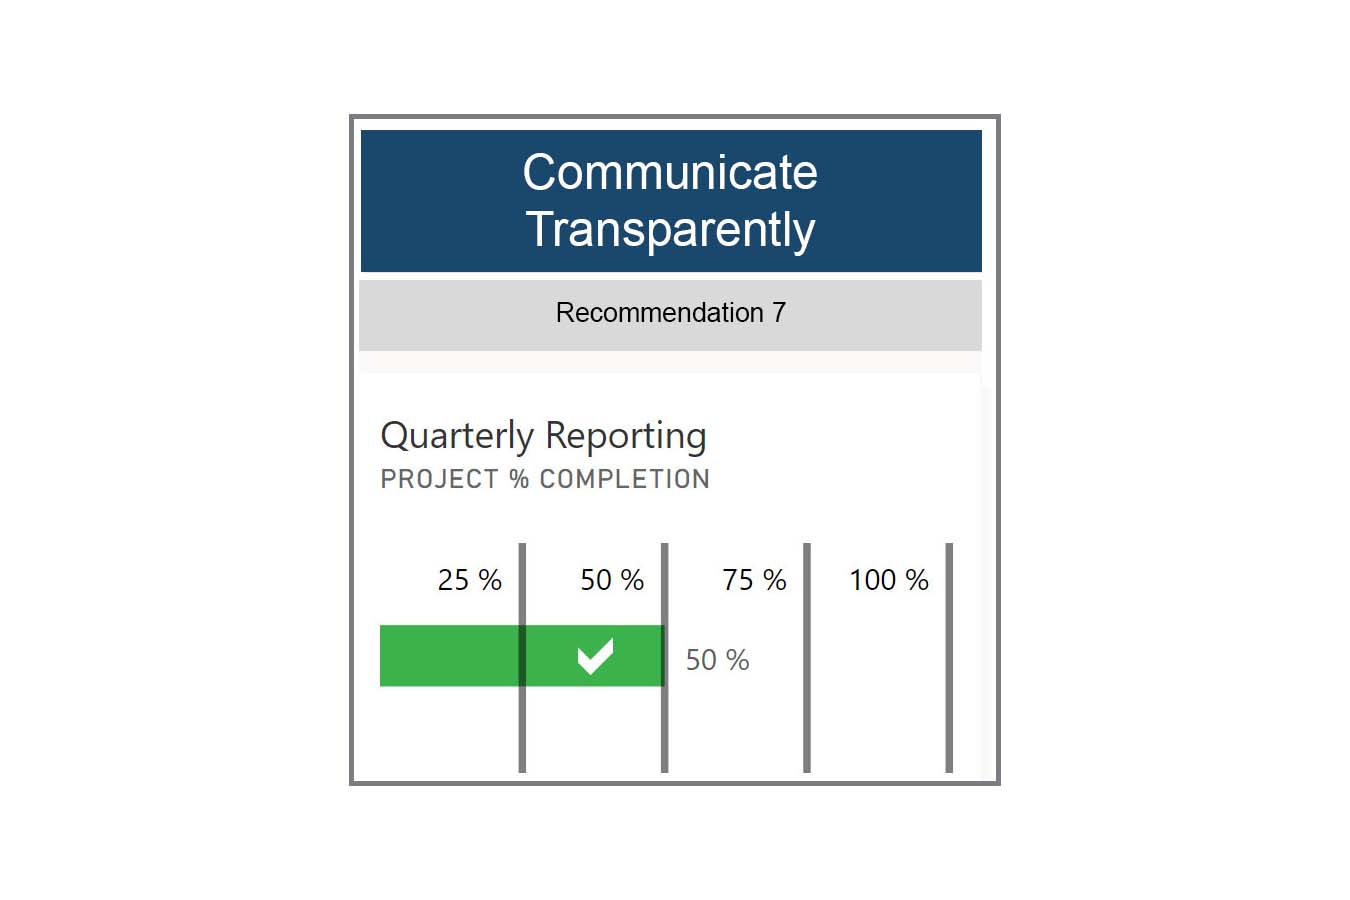 Communicate transparently recommendation 7 graphic